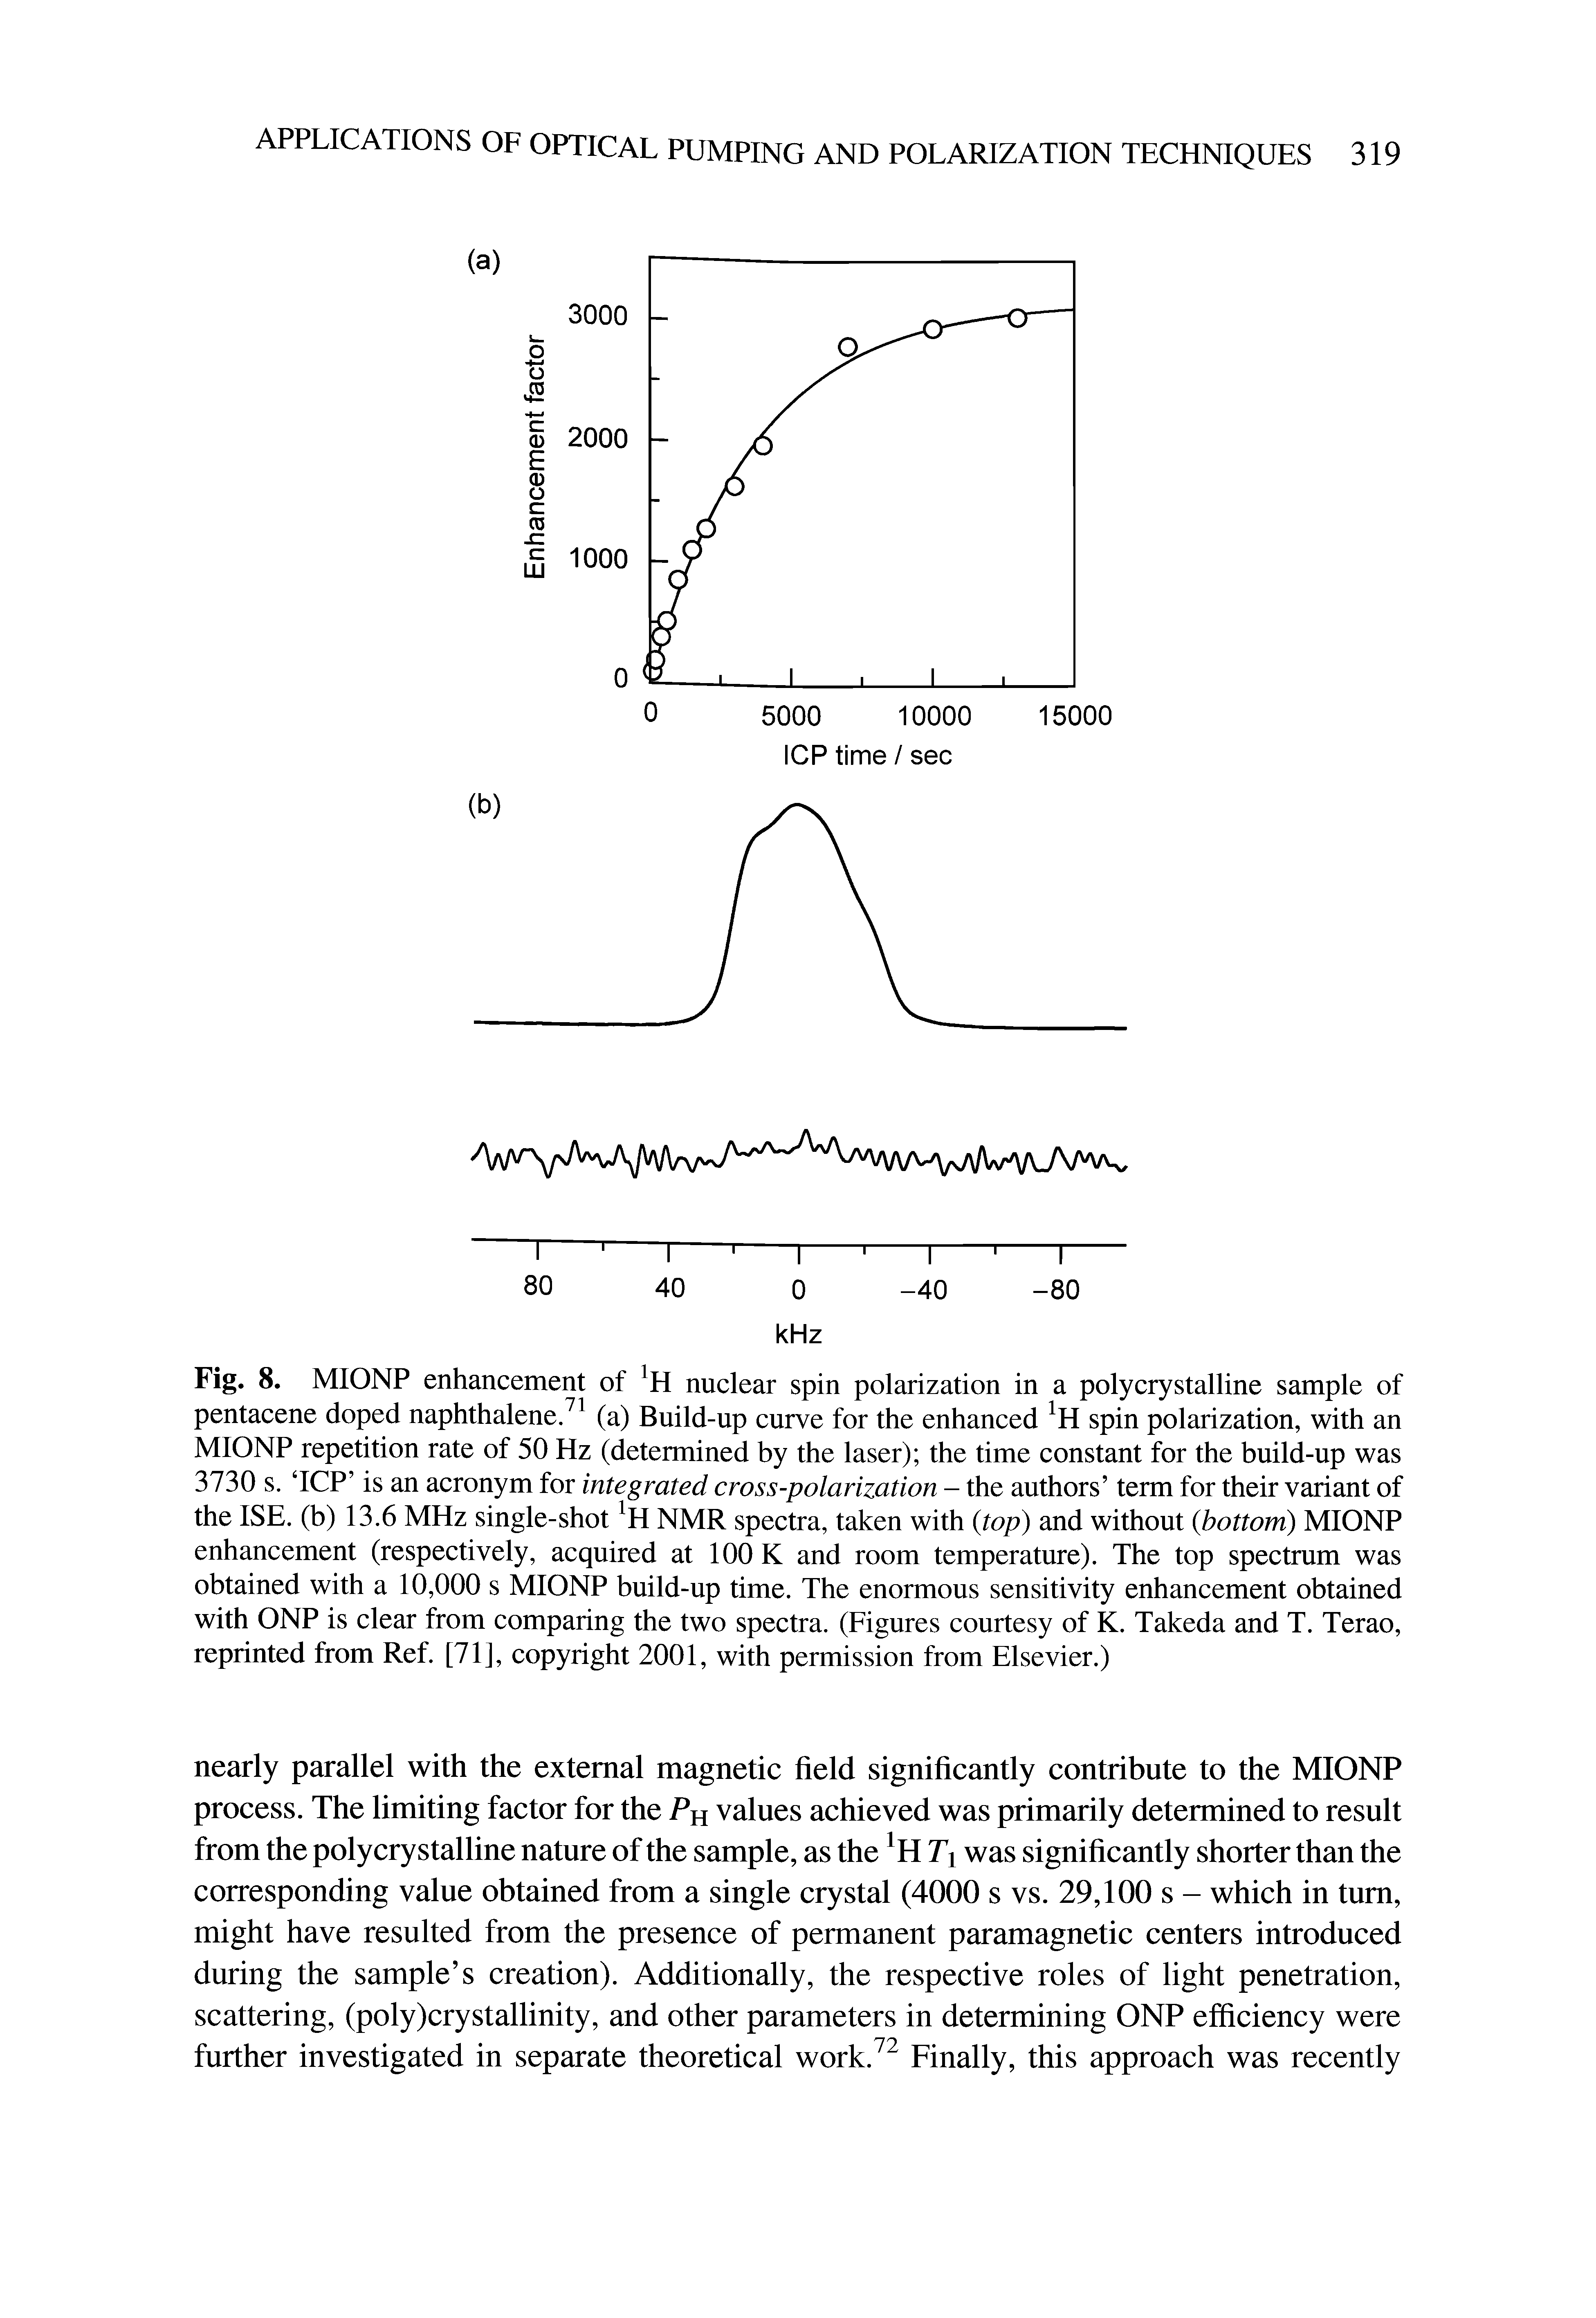 Fig. 8. MIONP enhancement of nuclear spin polarization in a polycrystalline sample of pentacene doped naphthalene/ (a) Build-up curve for the enhanced spin polarization, with an MIONP repetition rate of 50 Hz (determined by the laser) the time constant for the build-up was 3730 s. TCP is an acronym for integrated cross-polarization - the authors term for their variant of the ISE. (b) 13.6 MHz single-shot H NMR spectra, taken with (top) and without bottom) MIONP enhancement (respectively, acquired at 100 K and room temperature). The top spectrum was obtained with a 10,000 s MIONP build-up time. The enormous sensitivity enhancement obtained with ONP is clear from comparing the two spectra. (Figures courtesy of K. Takeda and T. Terao, reprinted from Ref. [71], copyright 2001, with permission from Elsevier.)...